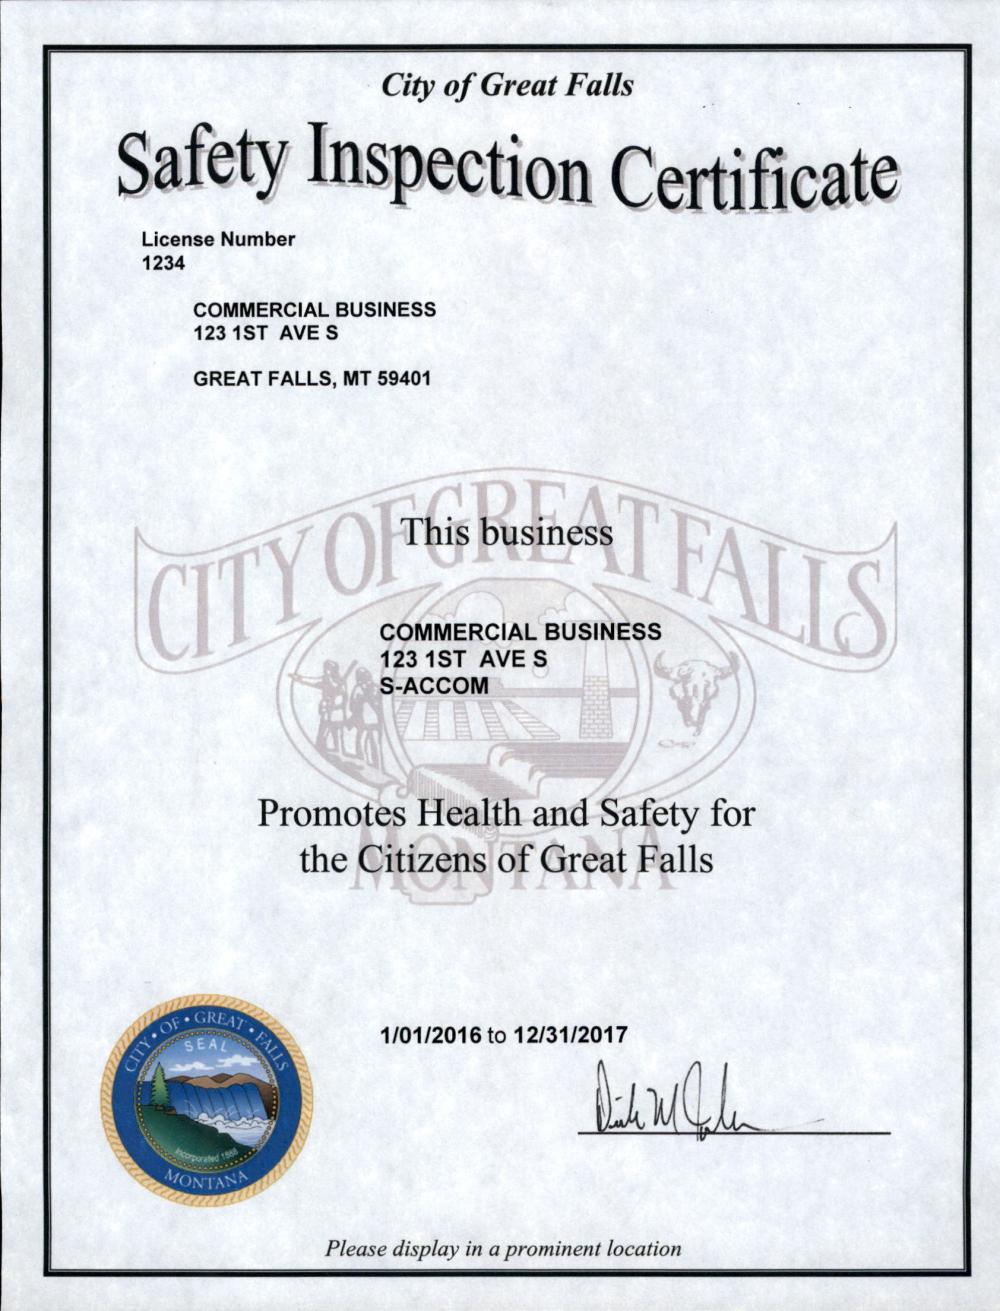 Fire Safety Inspection Certificate Sample - HSE Images & Videos Within Certificate Of Inspection Template